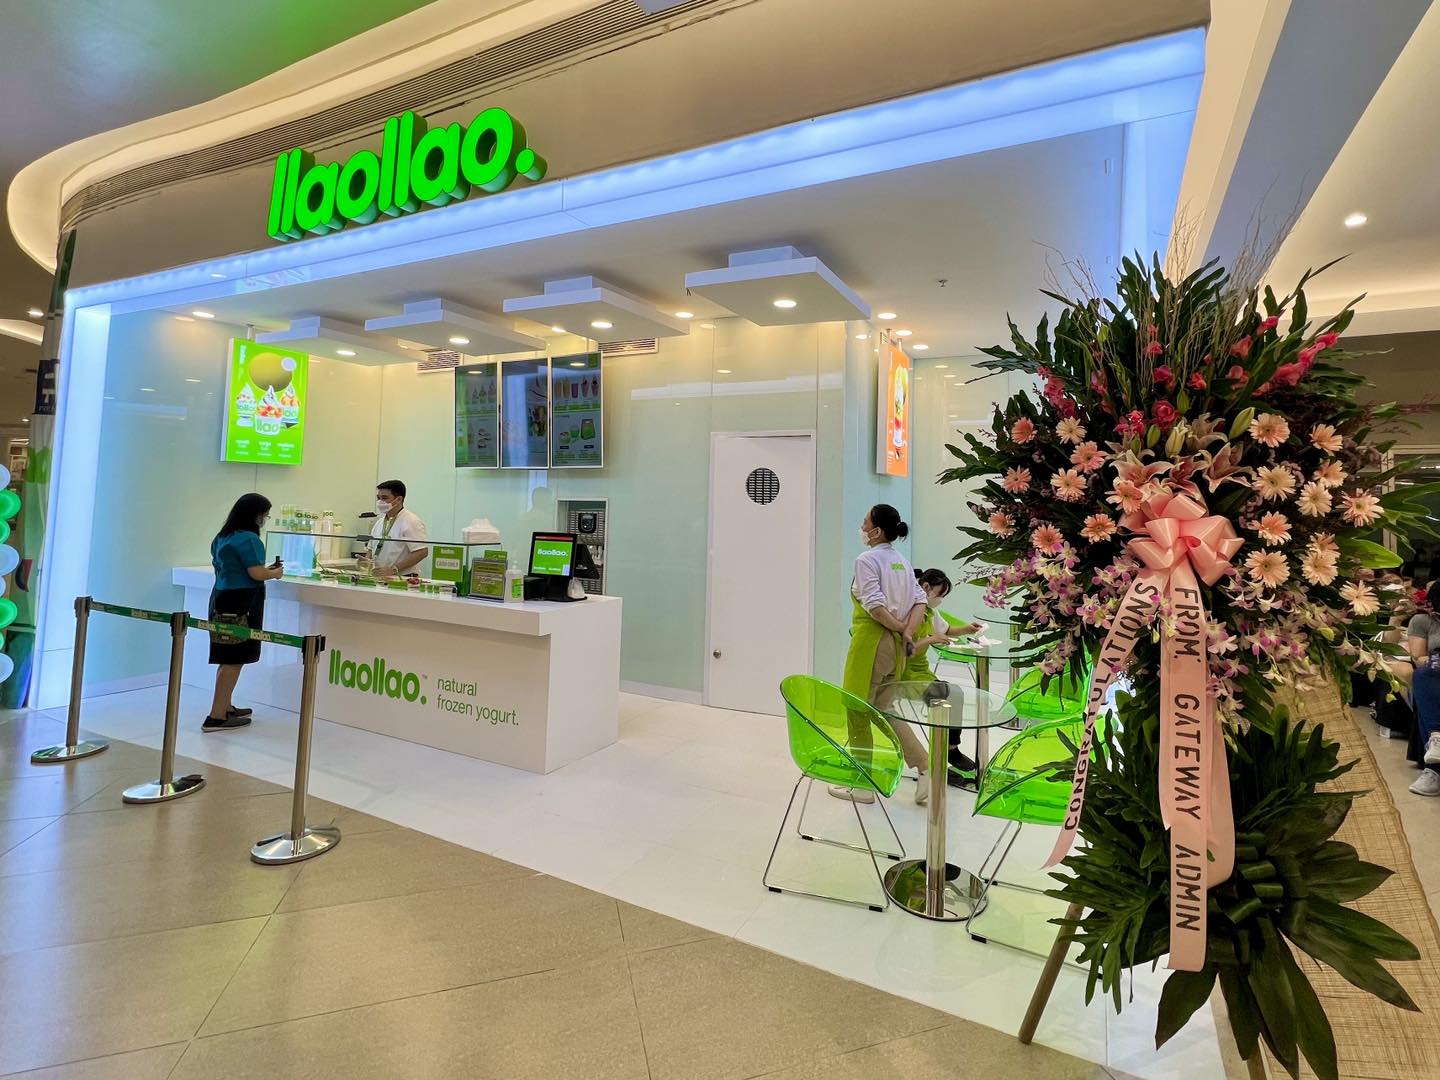 Spanish froyo llaollao makes its way to Gateway Mall 2